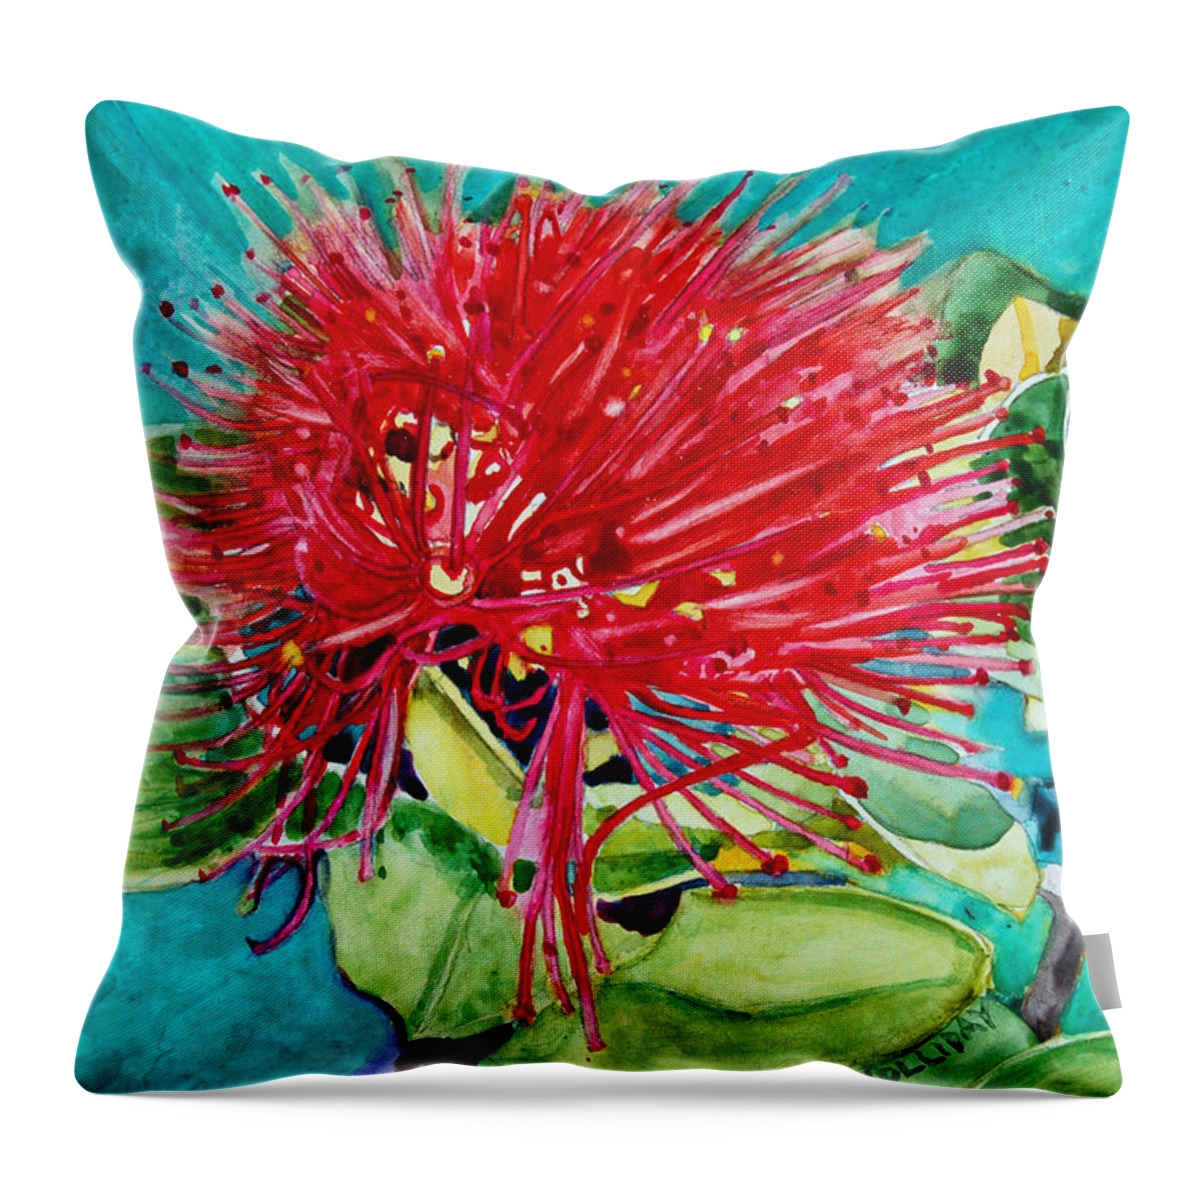 Lehua Blossom Throw Pillow featuring the painting Lehua Blossom by Terry Holliday